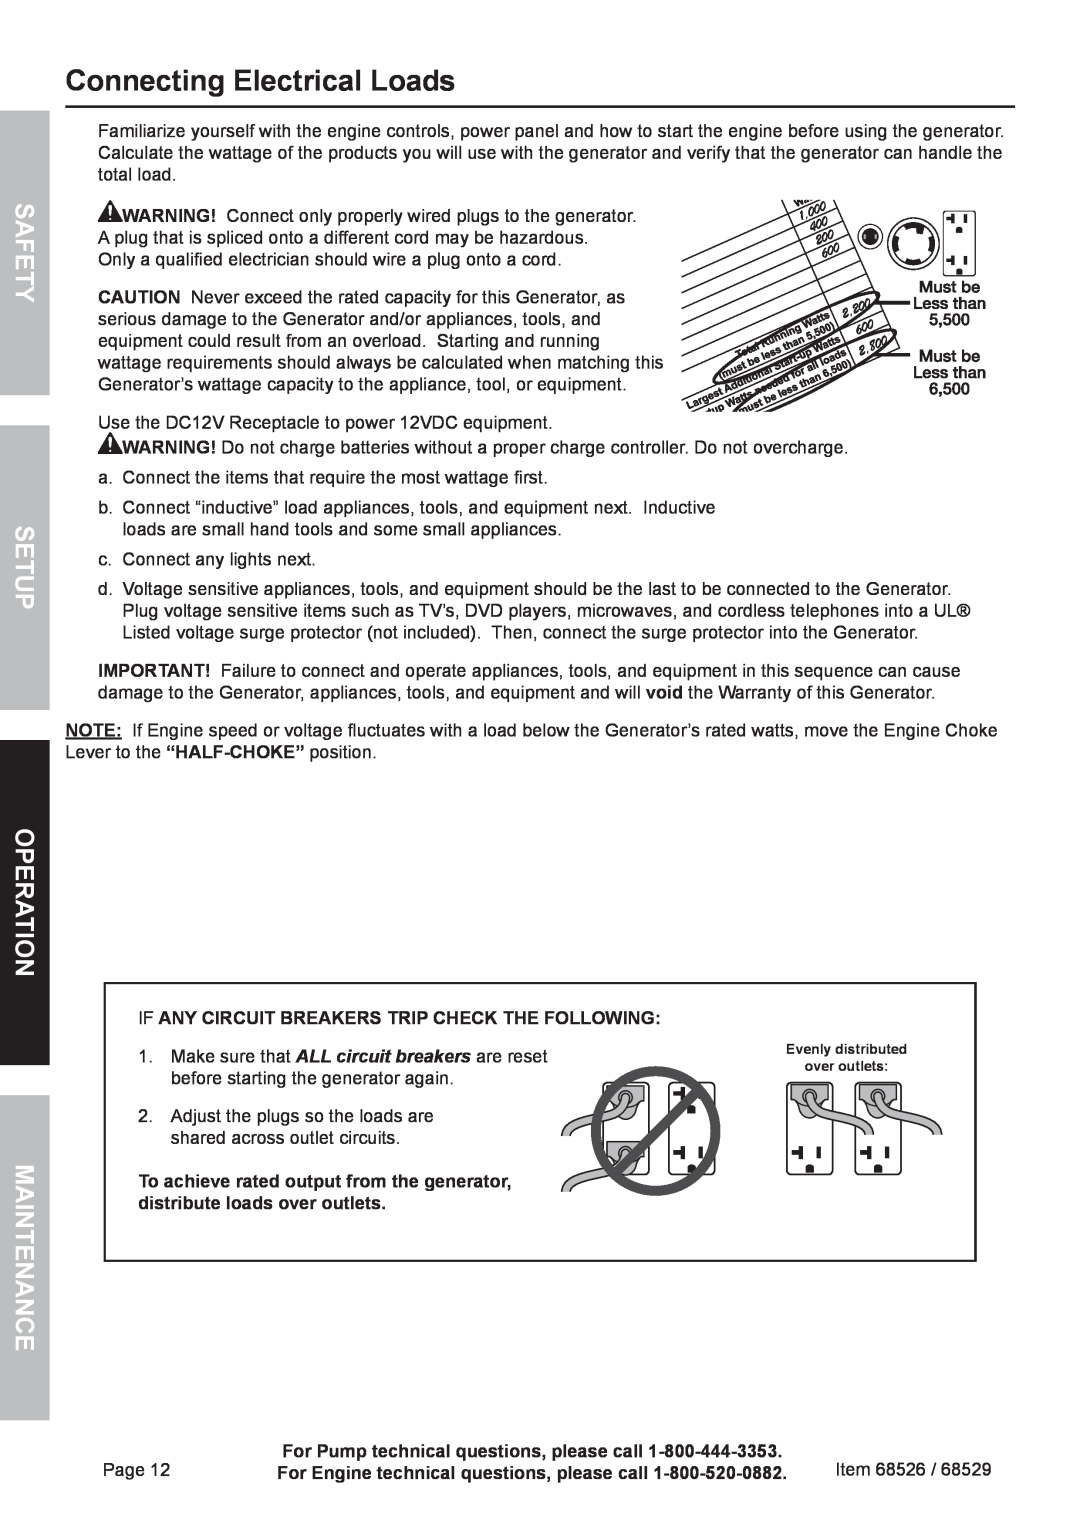 Harbor Freight Tools 68526 owner manual Connecting Electrical Loads, Safety Setup Operation, Maintenance 